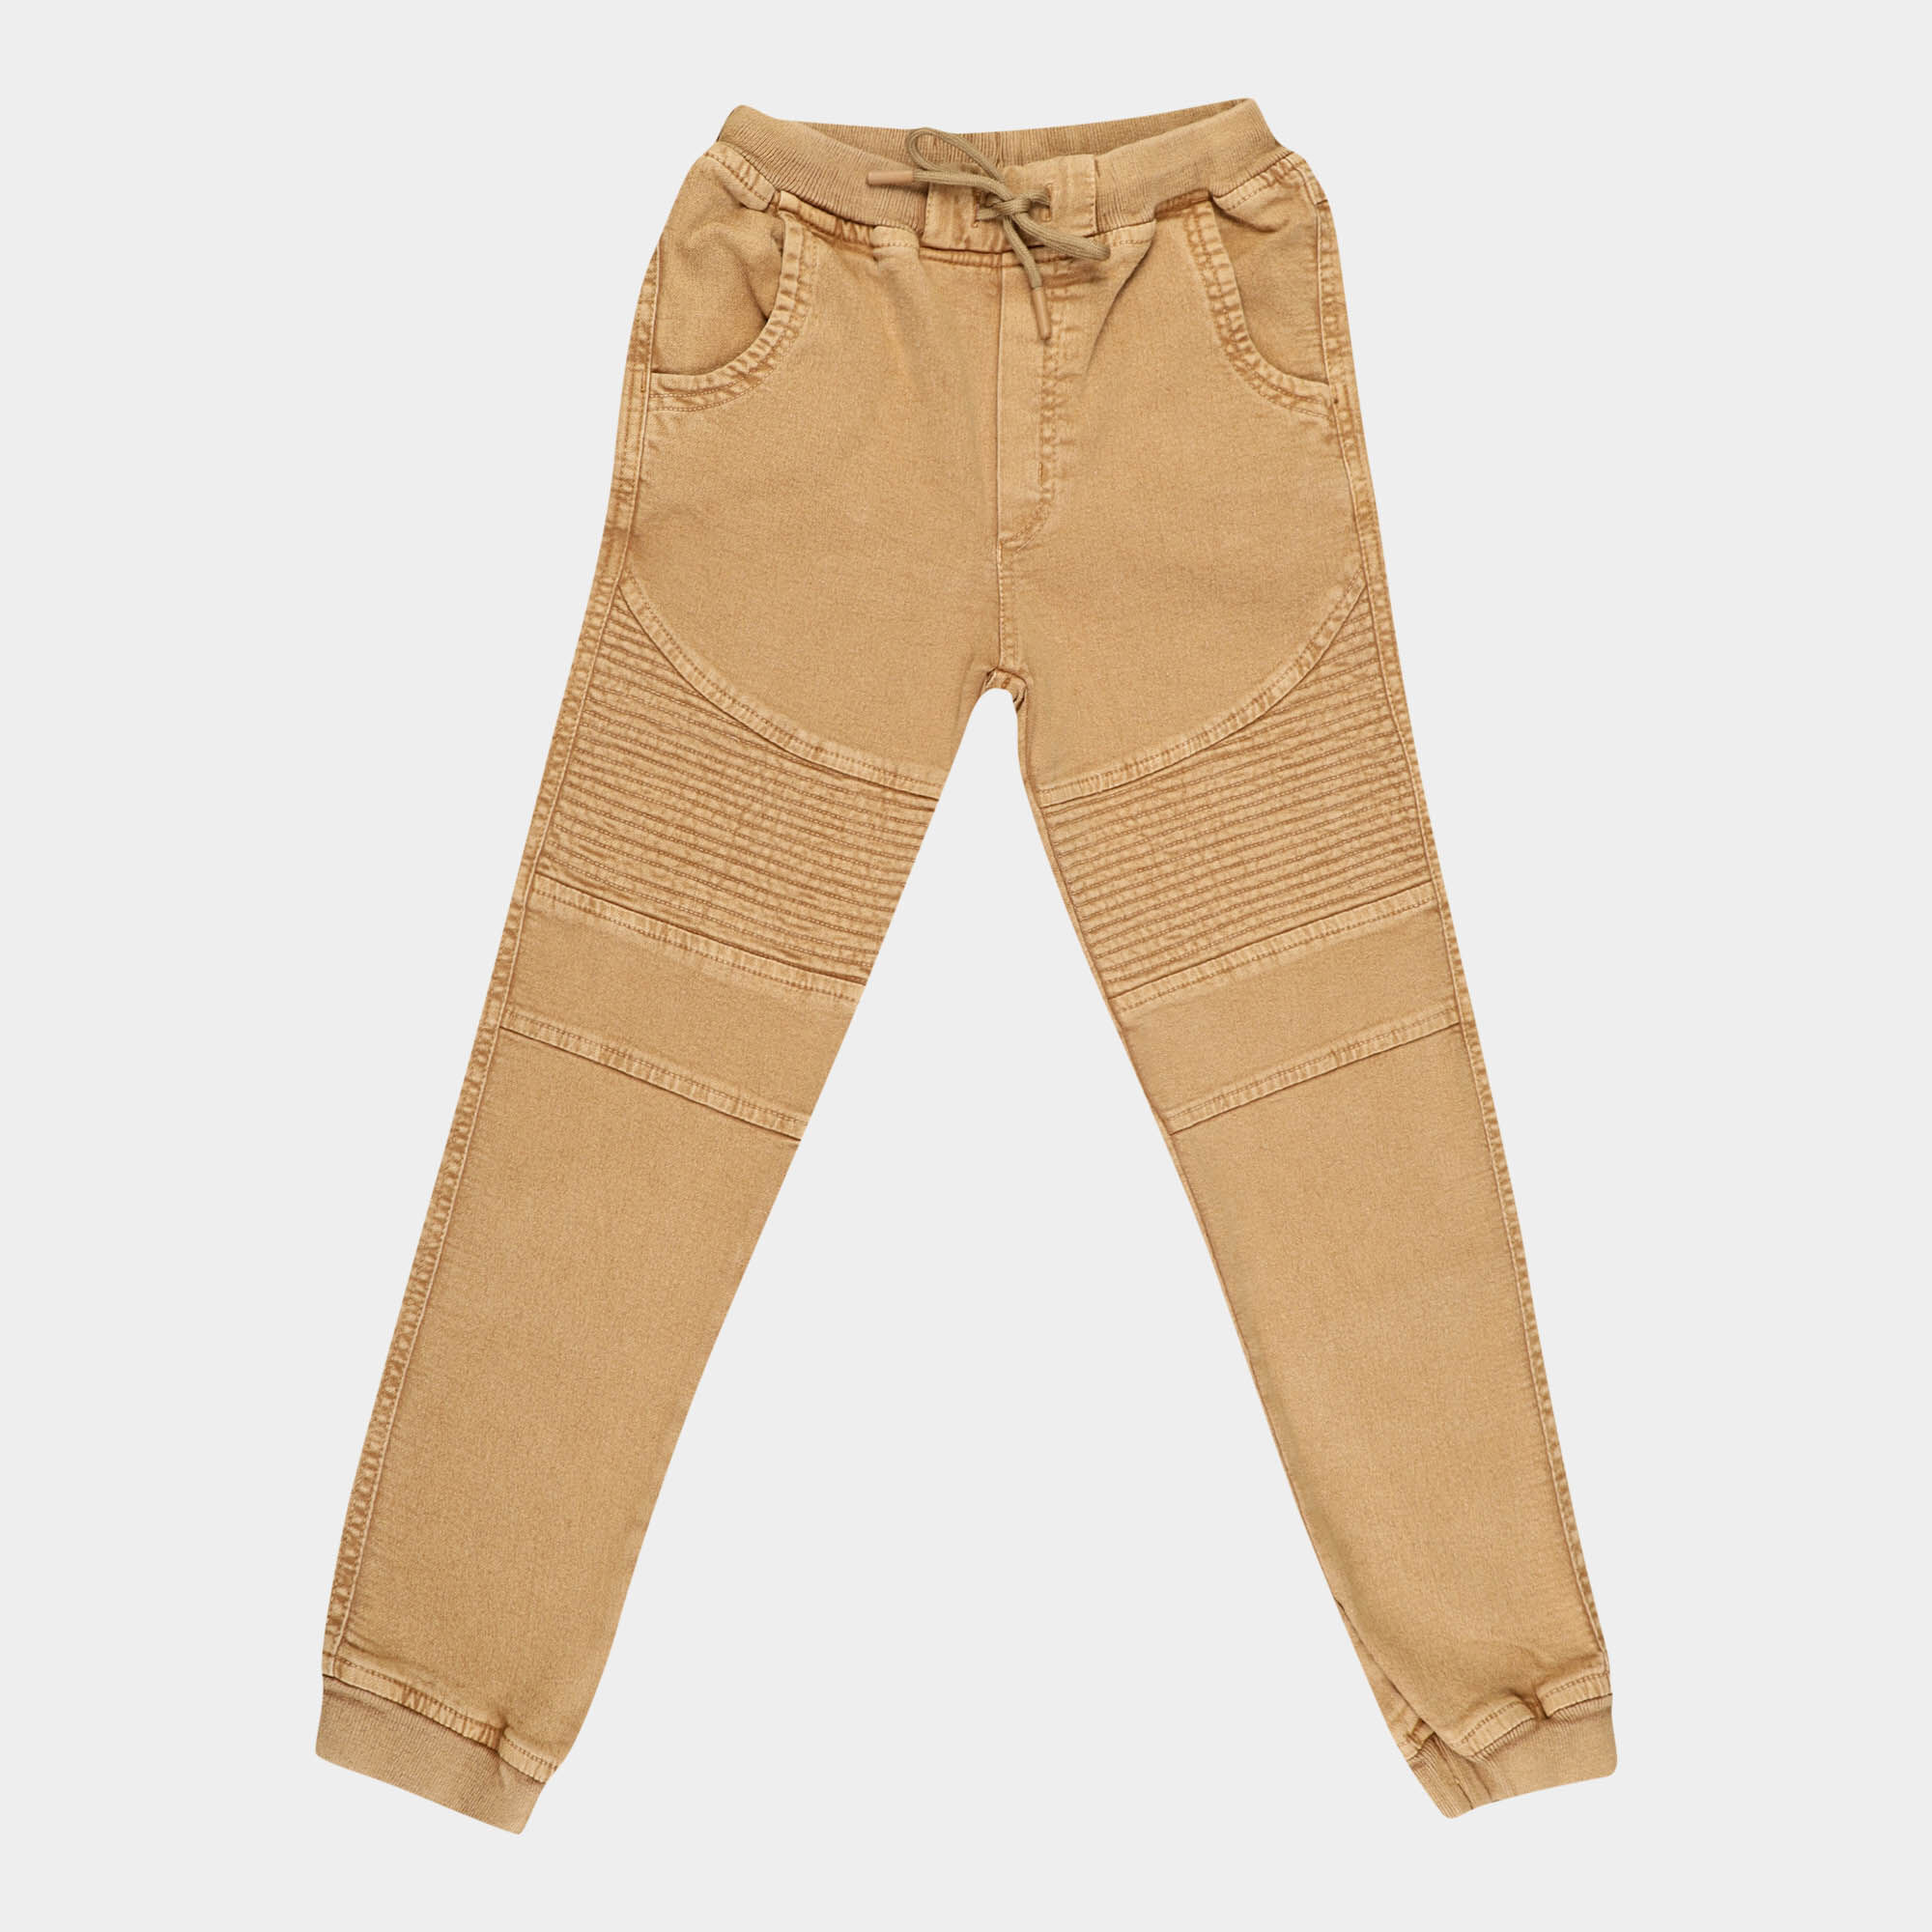 Jeans for Boys: Boys Jeans Pant, Tracks & Trousers for Boys | Mothercare  India